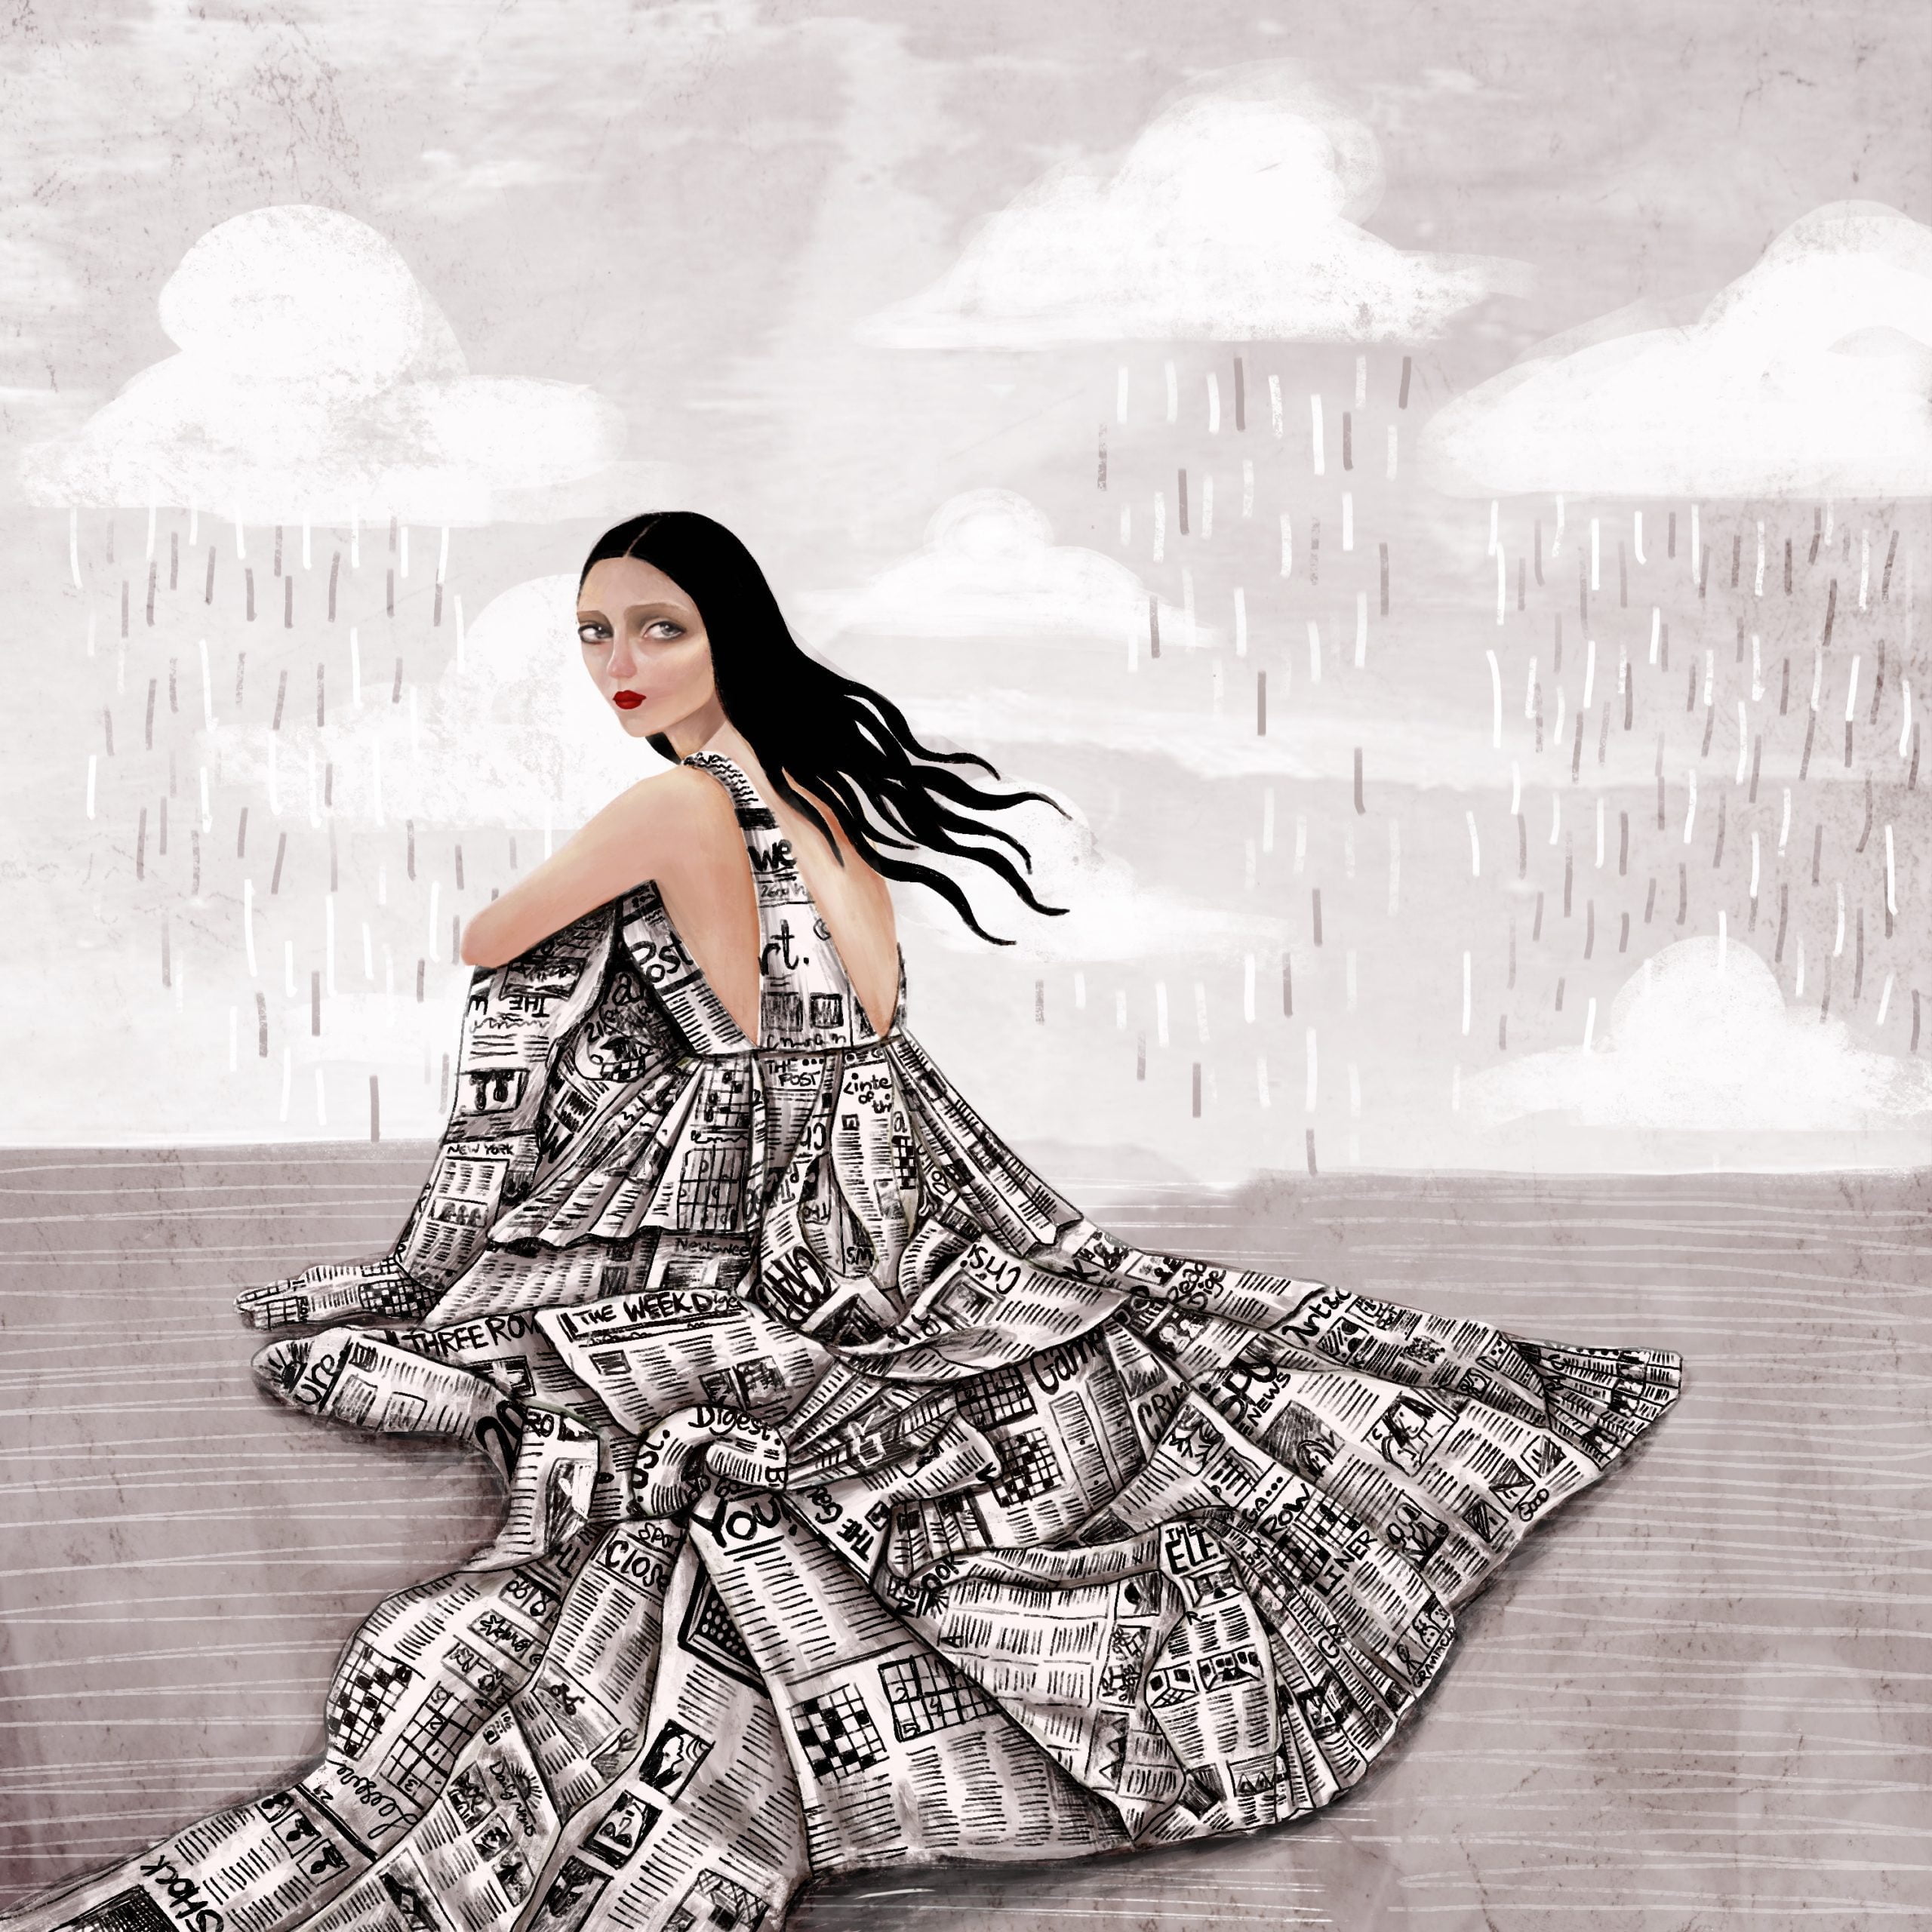 While rain continued to fall from those three cumulus clouds, the pink monochrome background faded to gray. She sat on the ground, facing away from the camera, draped in an elaborate dress made of newspapers that flowed behind her. Her hair blew back, in the direction of her sad gaze. Searching through the wind that passed, she was encumbered by all that is newsworthy.